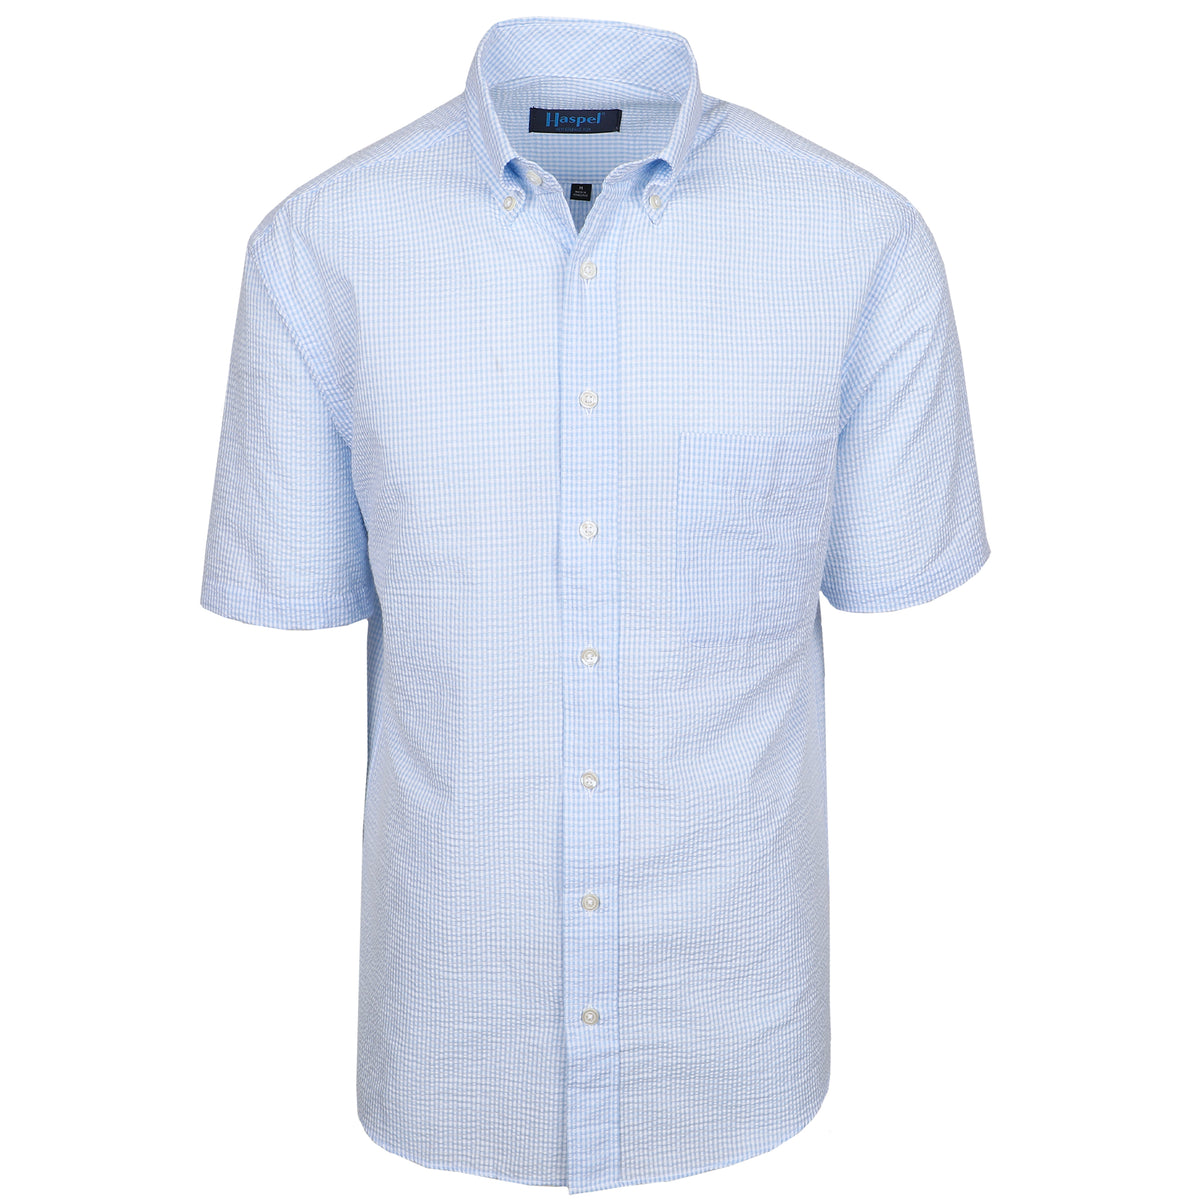 Seersucker all year long in a huey blue seersucker shirt. Subtle, lightweight, and a texture they begs a second look.  100% Cotton Seersucker • Button Down Collar • Short Sleeve • Chest Pocket • Machine Washable • Made in Italy